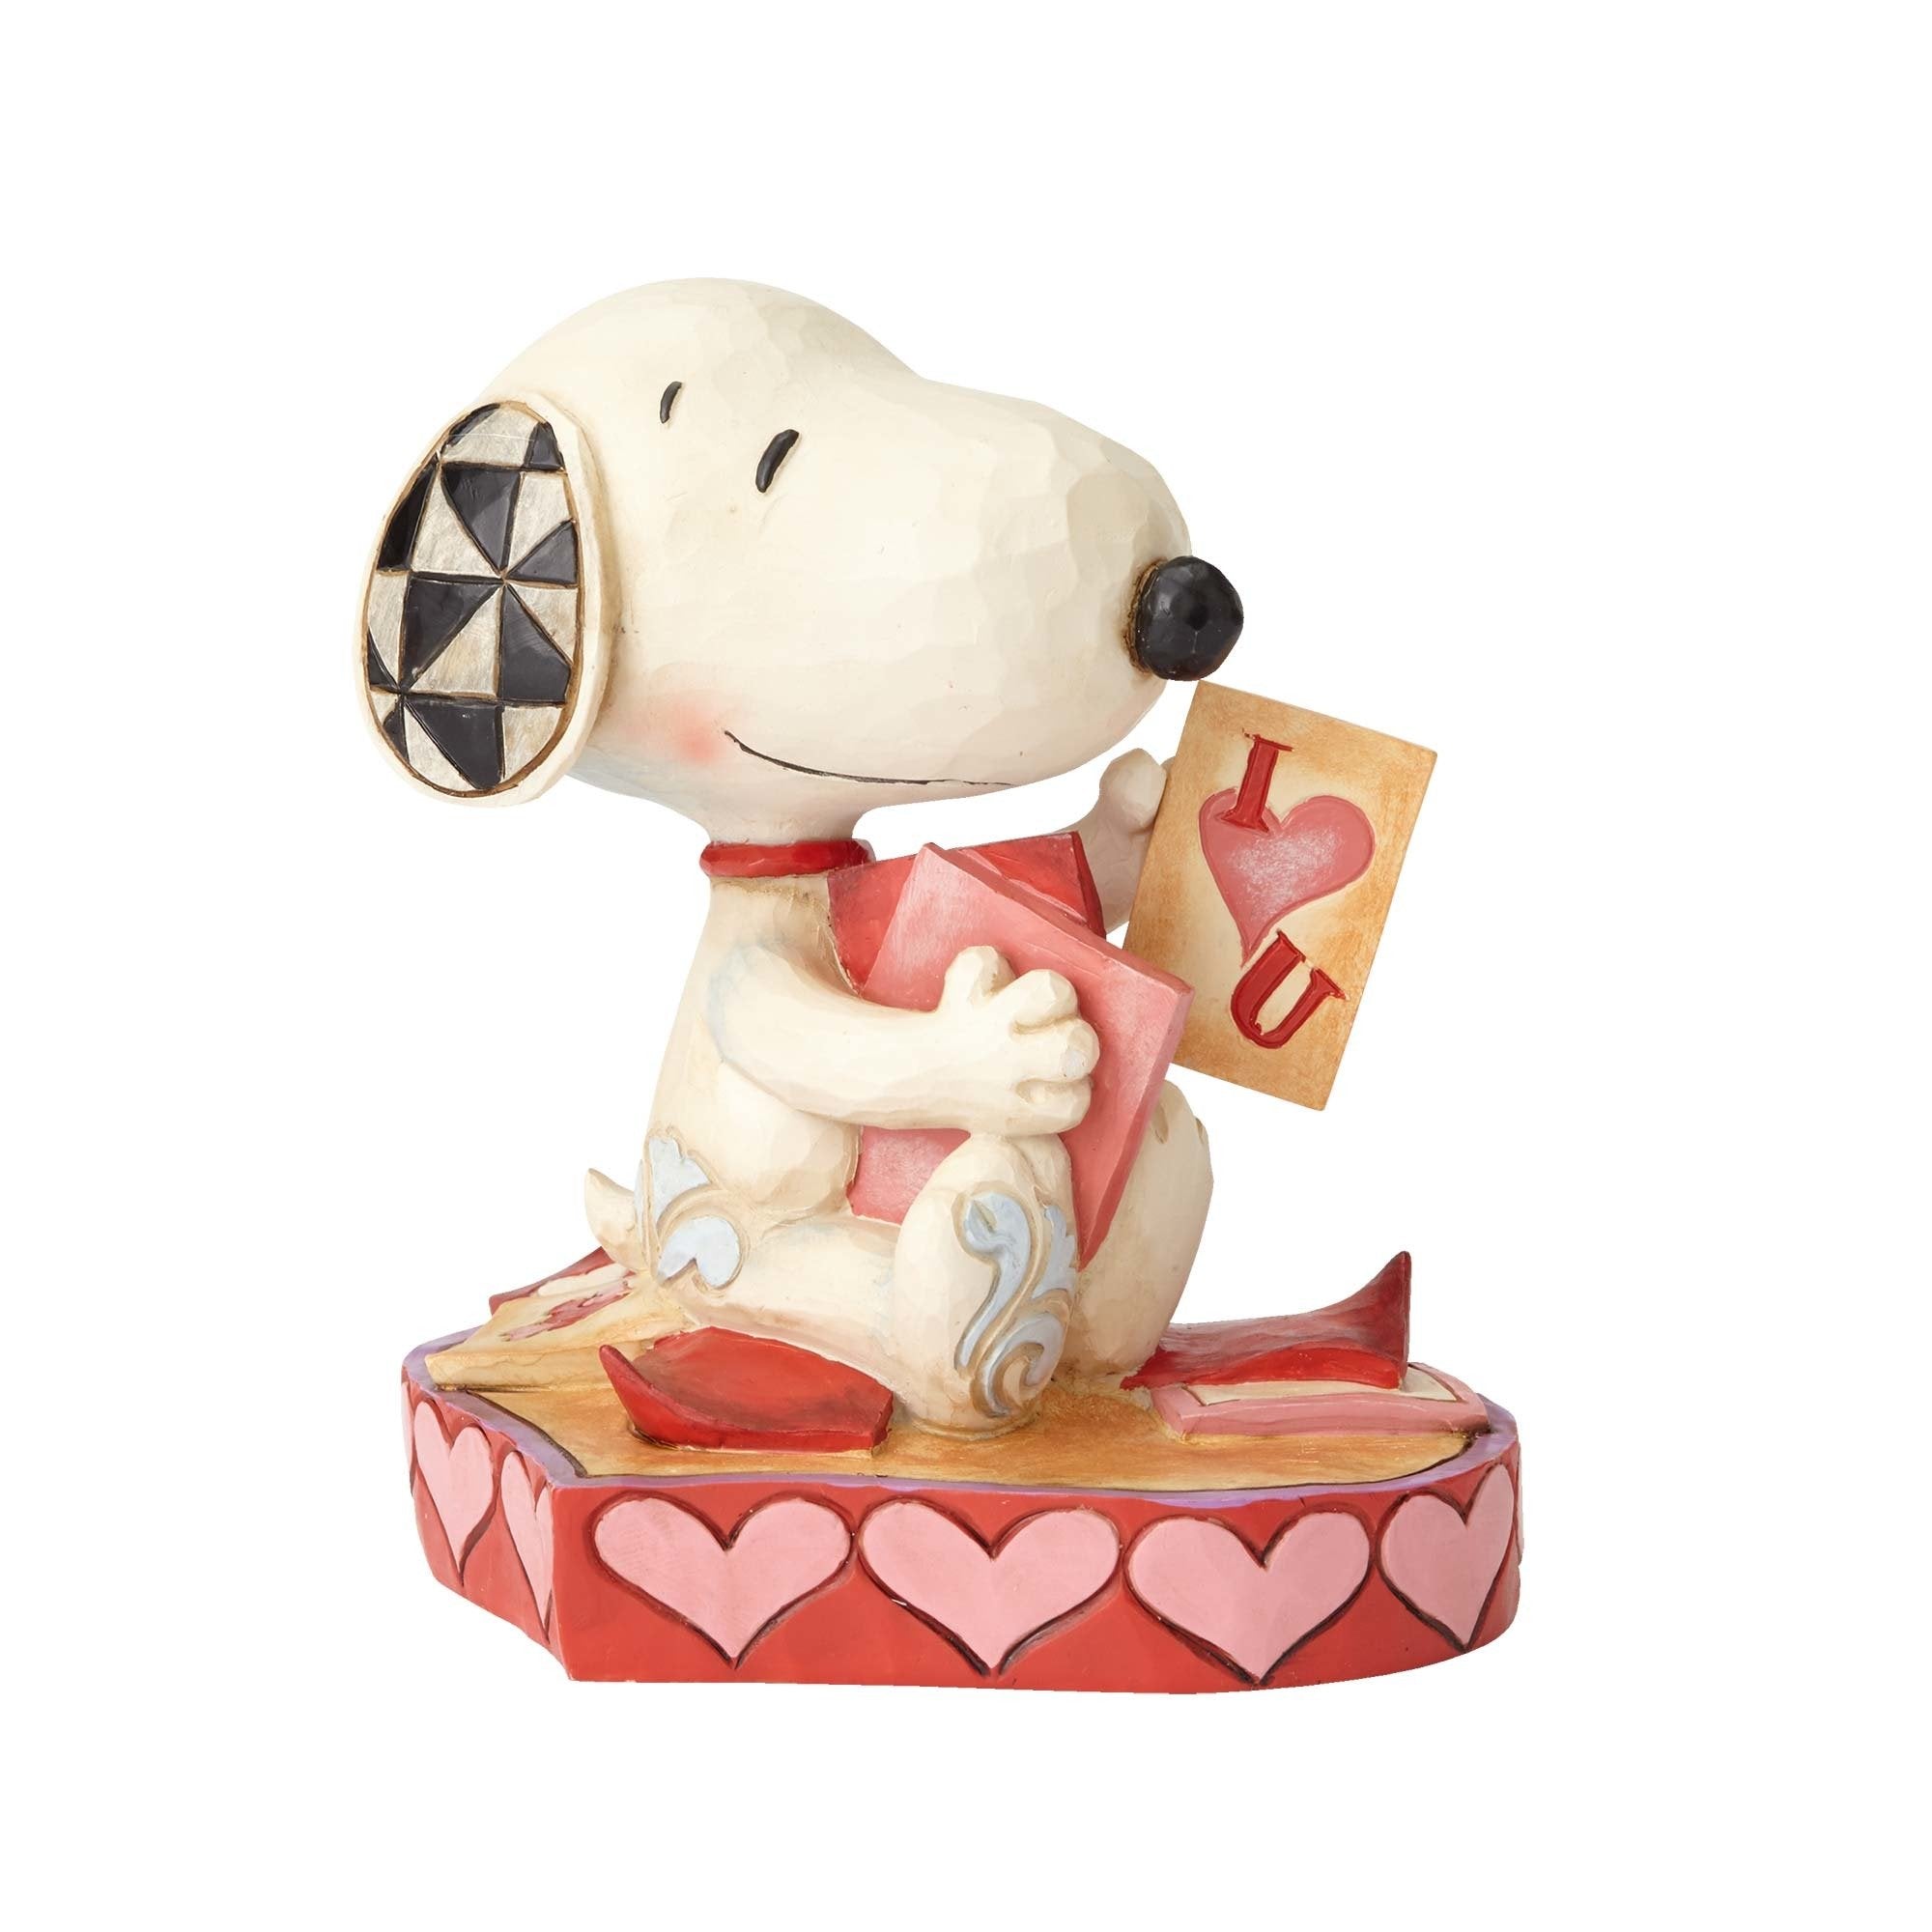 Peanuts by Jim Shore Snoopy With Valentine's Cards Figurine